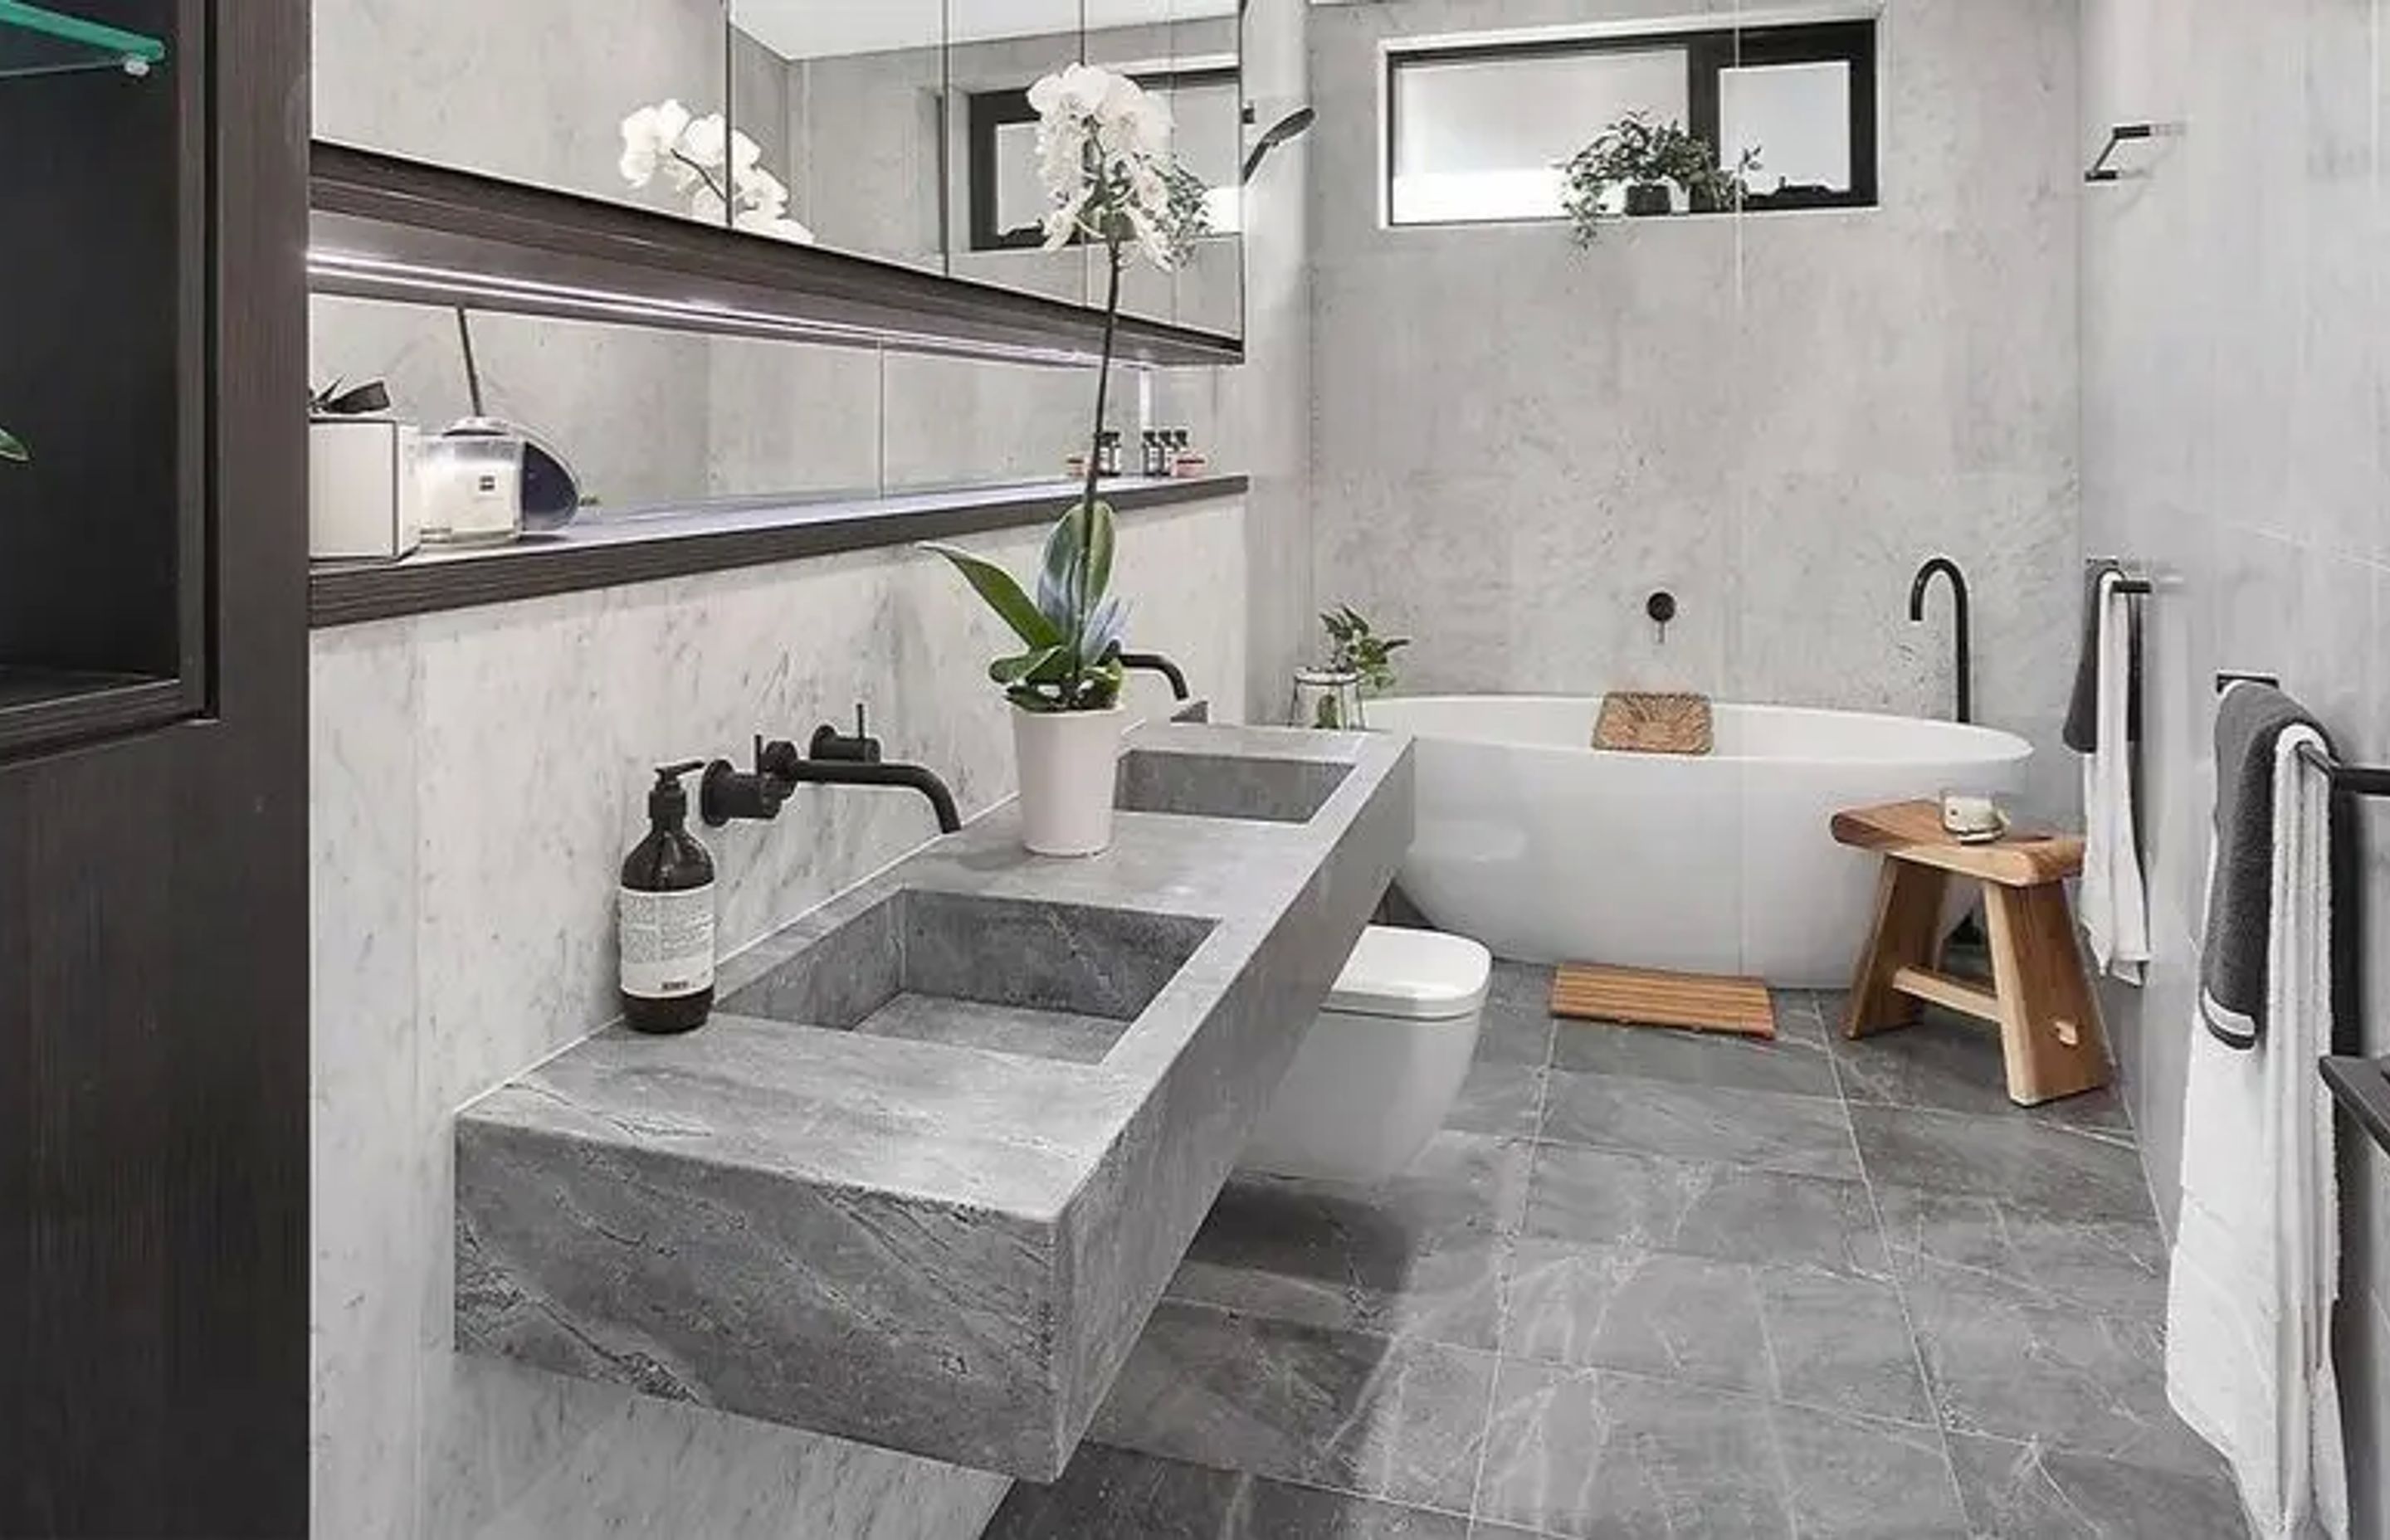 Can I Use Natural Stone in a Shower?